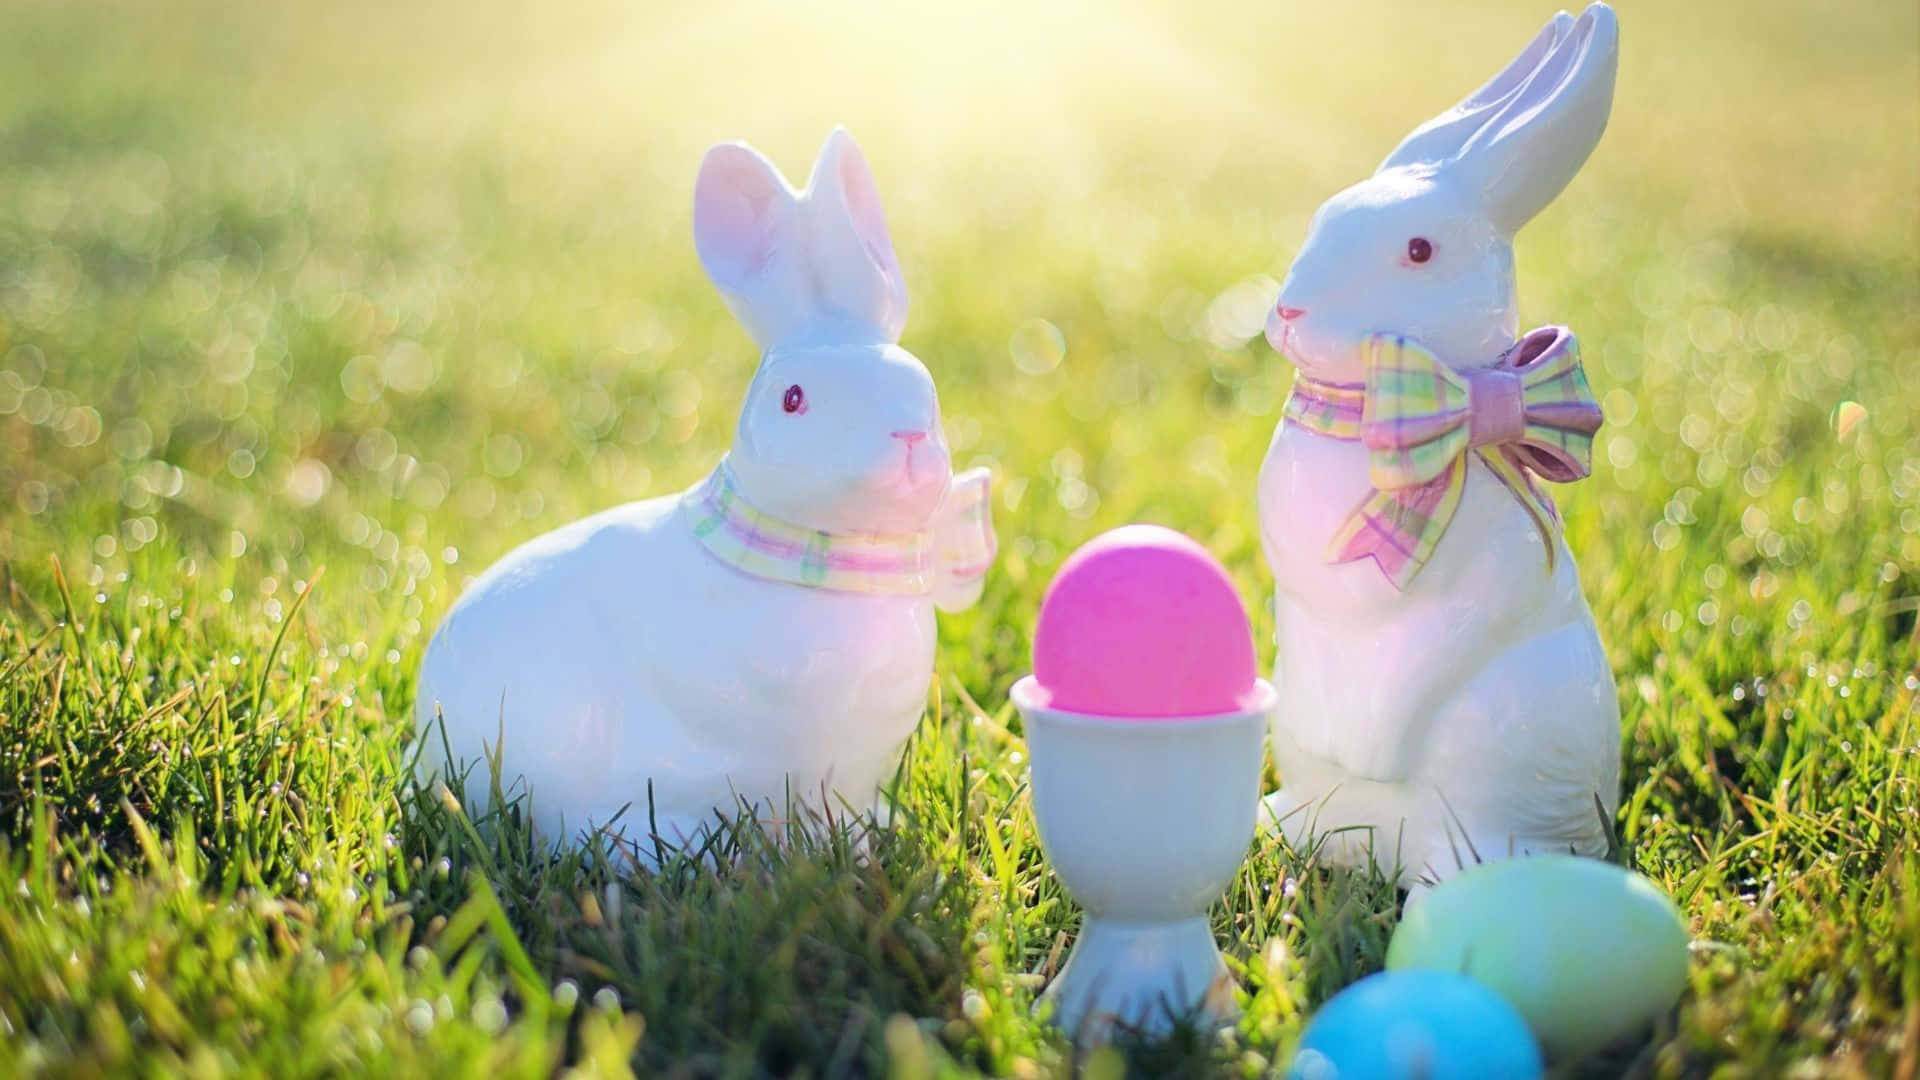 Two Easter Bunnies sharing an Easter basket. Wallpaper